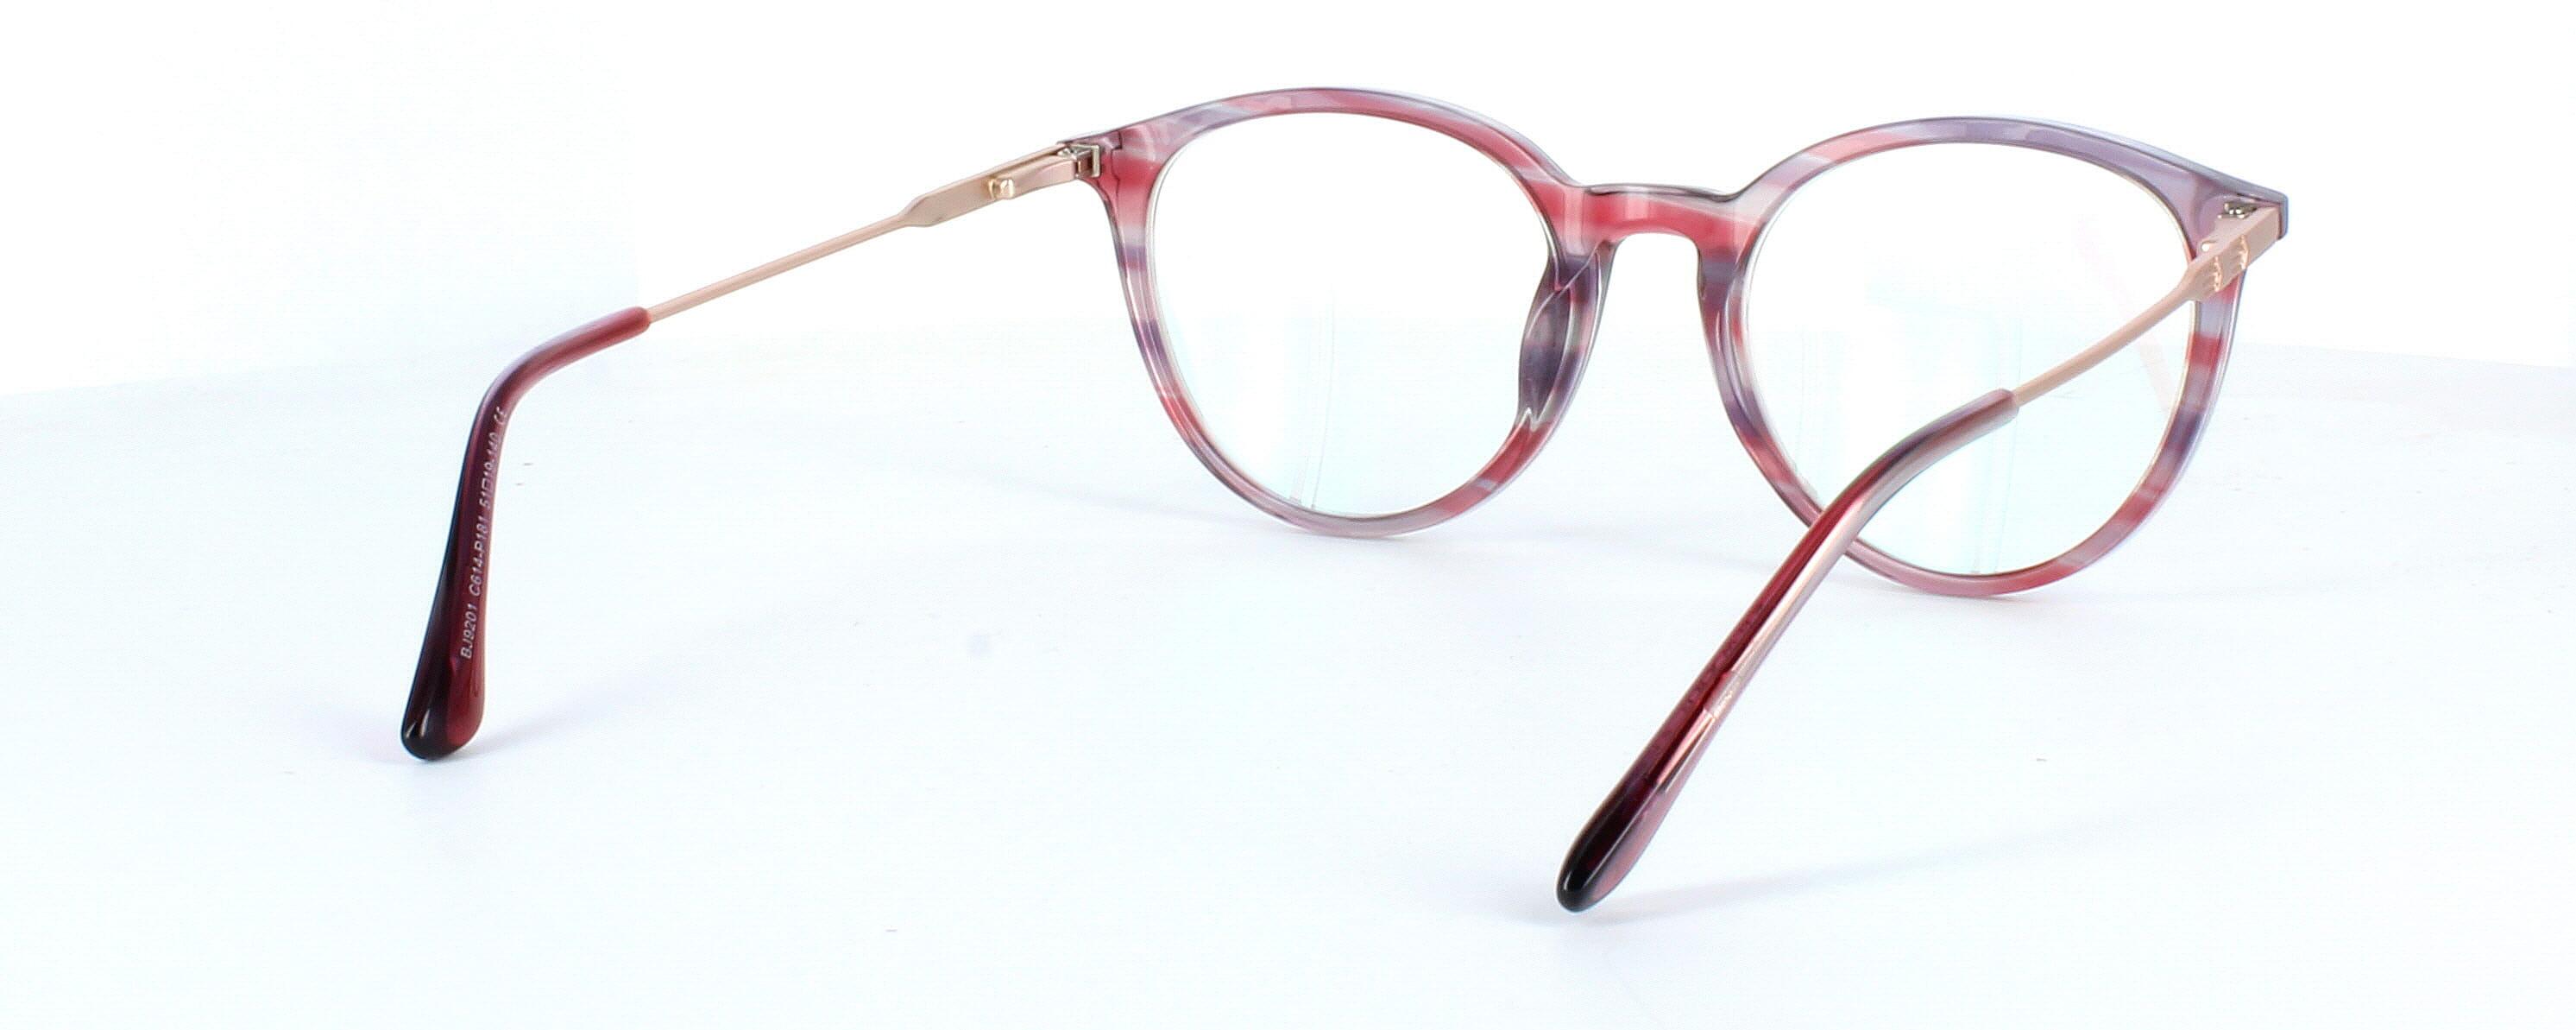 Edward Scotts BJ9201 C614 - Women's round shaped shiny burgundy, purple & grey acetate glasses with gold metal spring hinged arms - image view 5